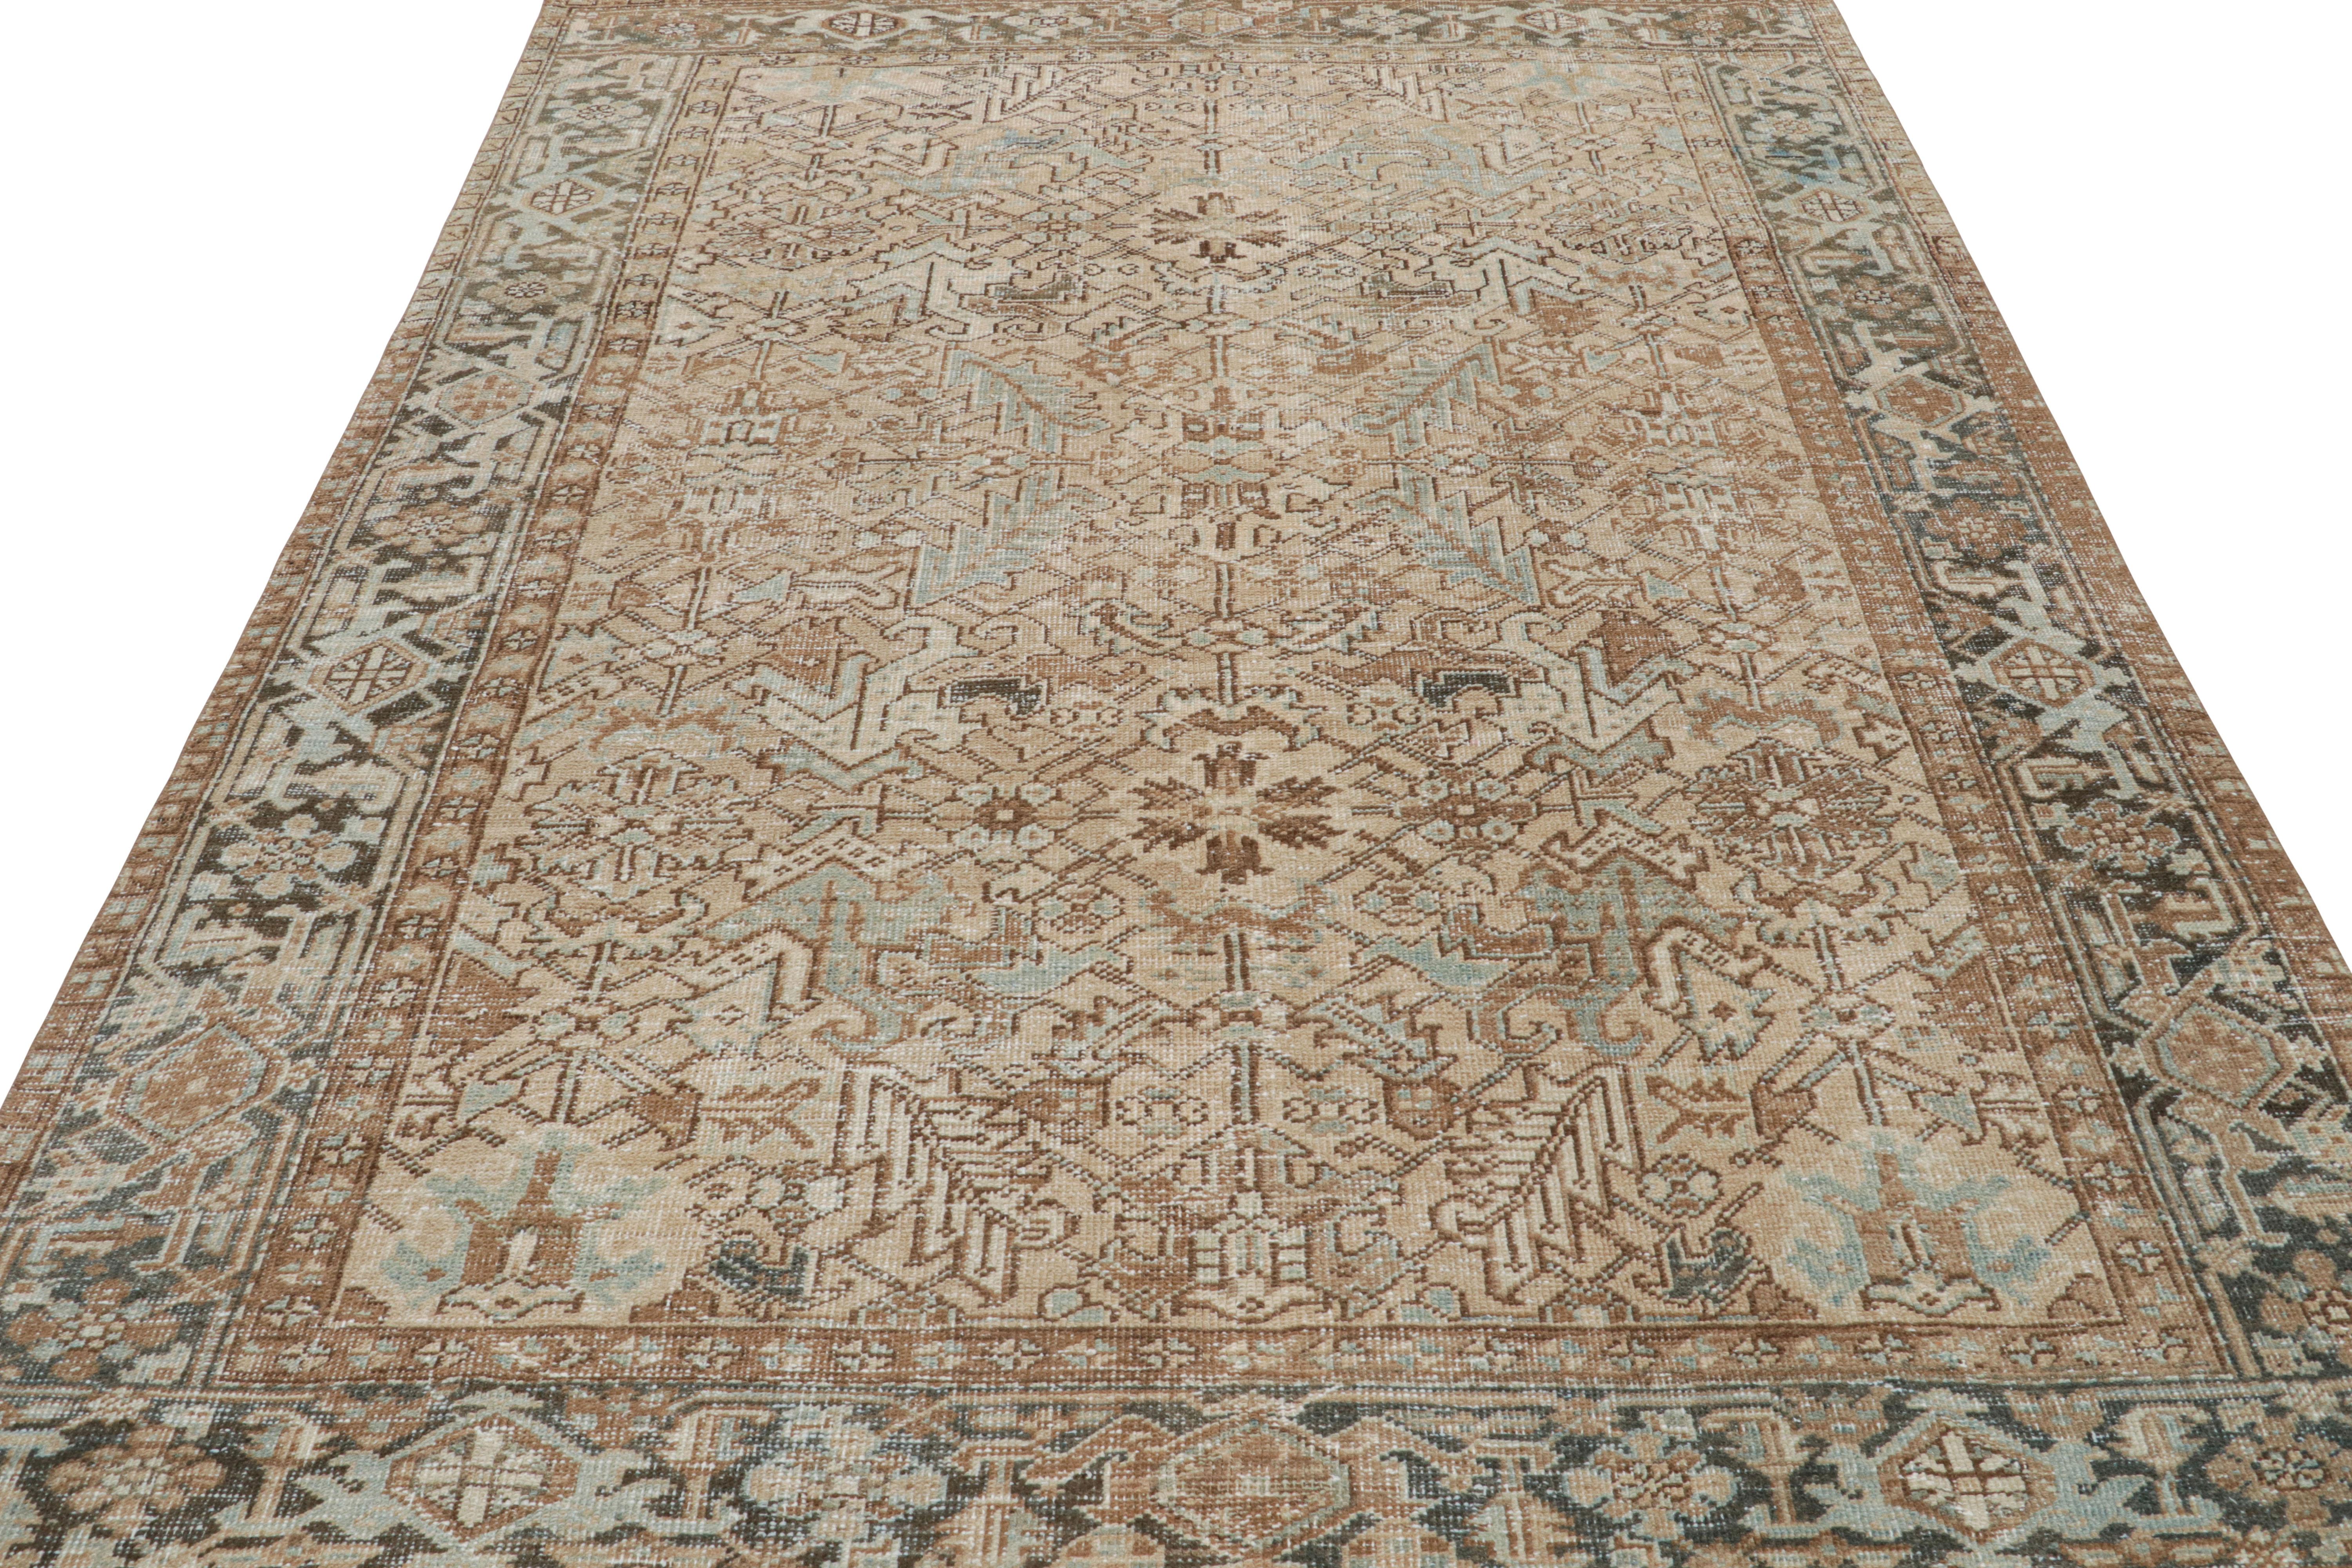 Late 20th Century Vintage Turkish Rug in Beige-Brown and Blue Geometric Patterns, from Rug & Kilim For Sale